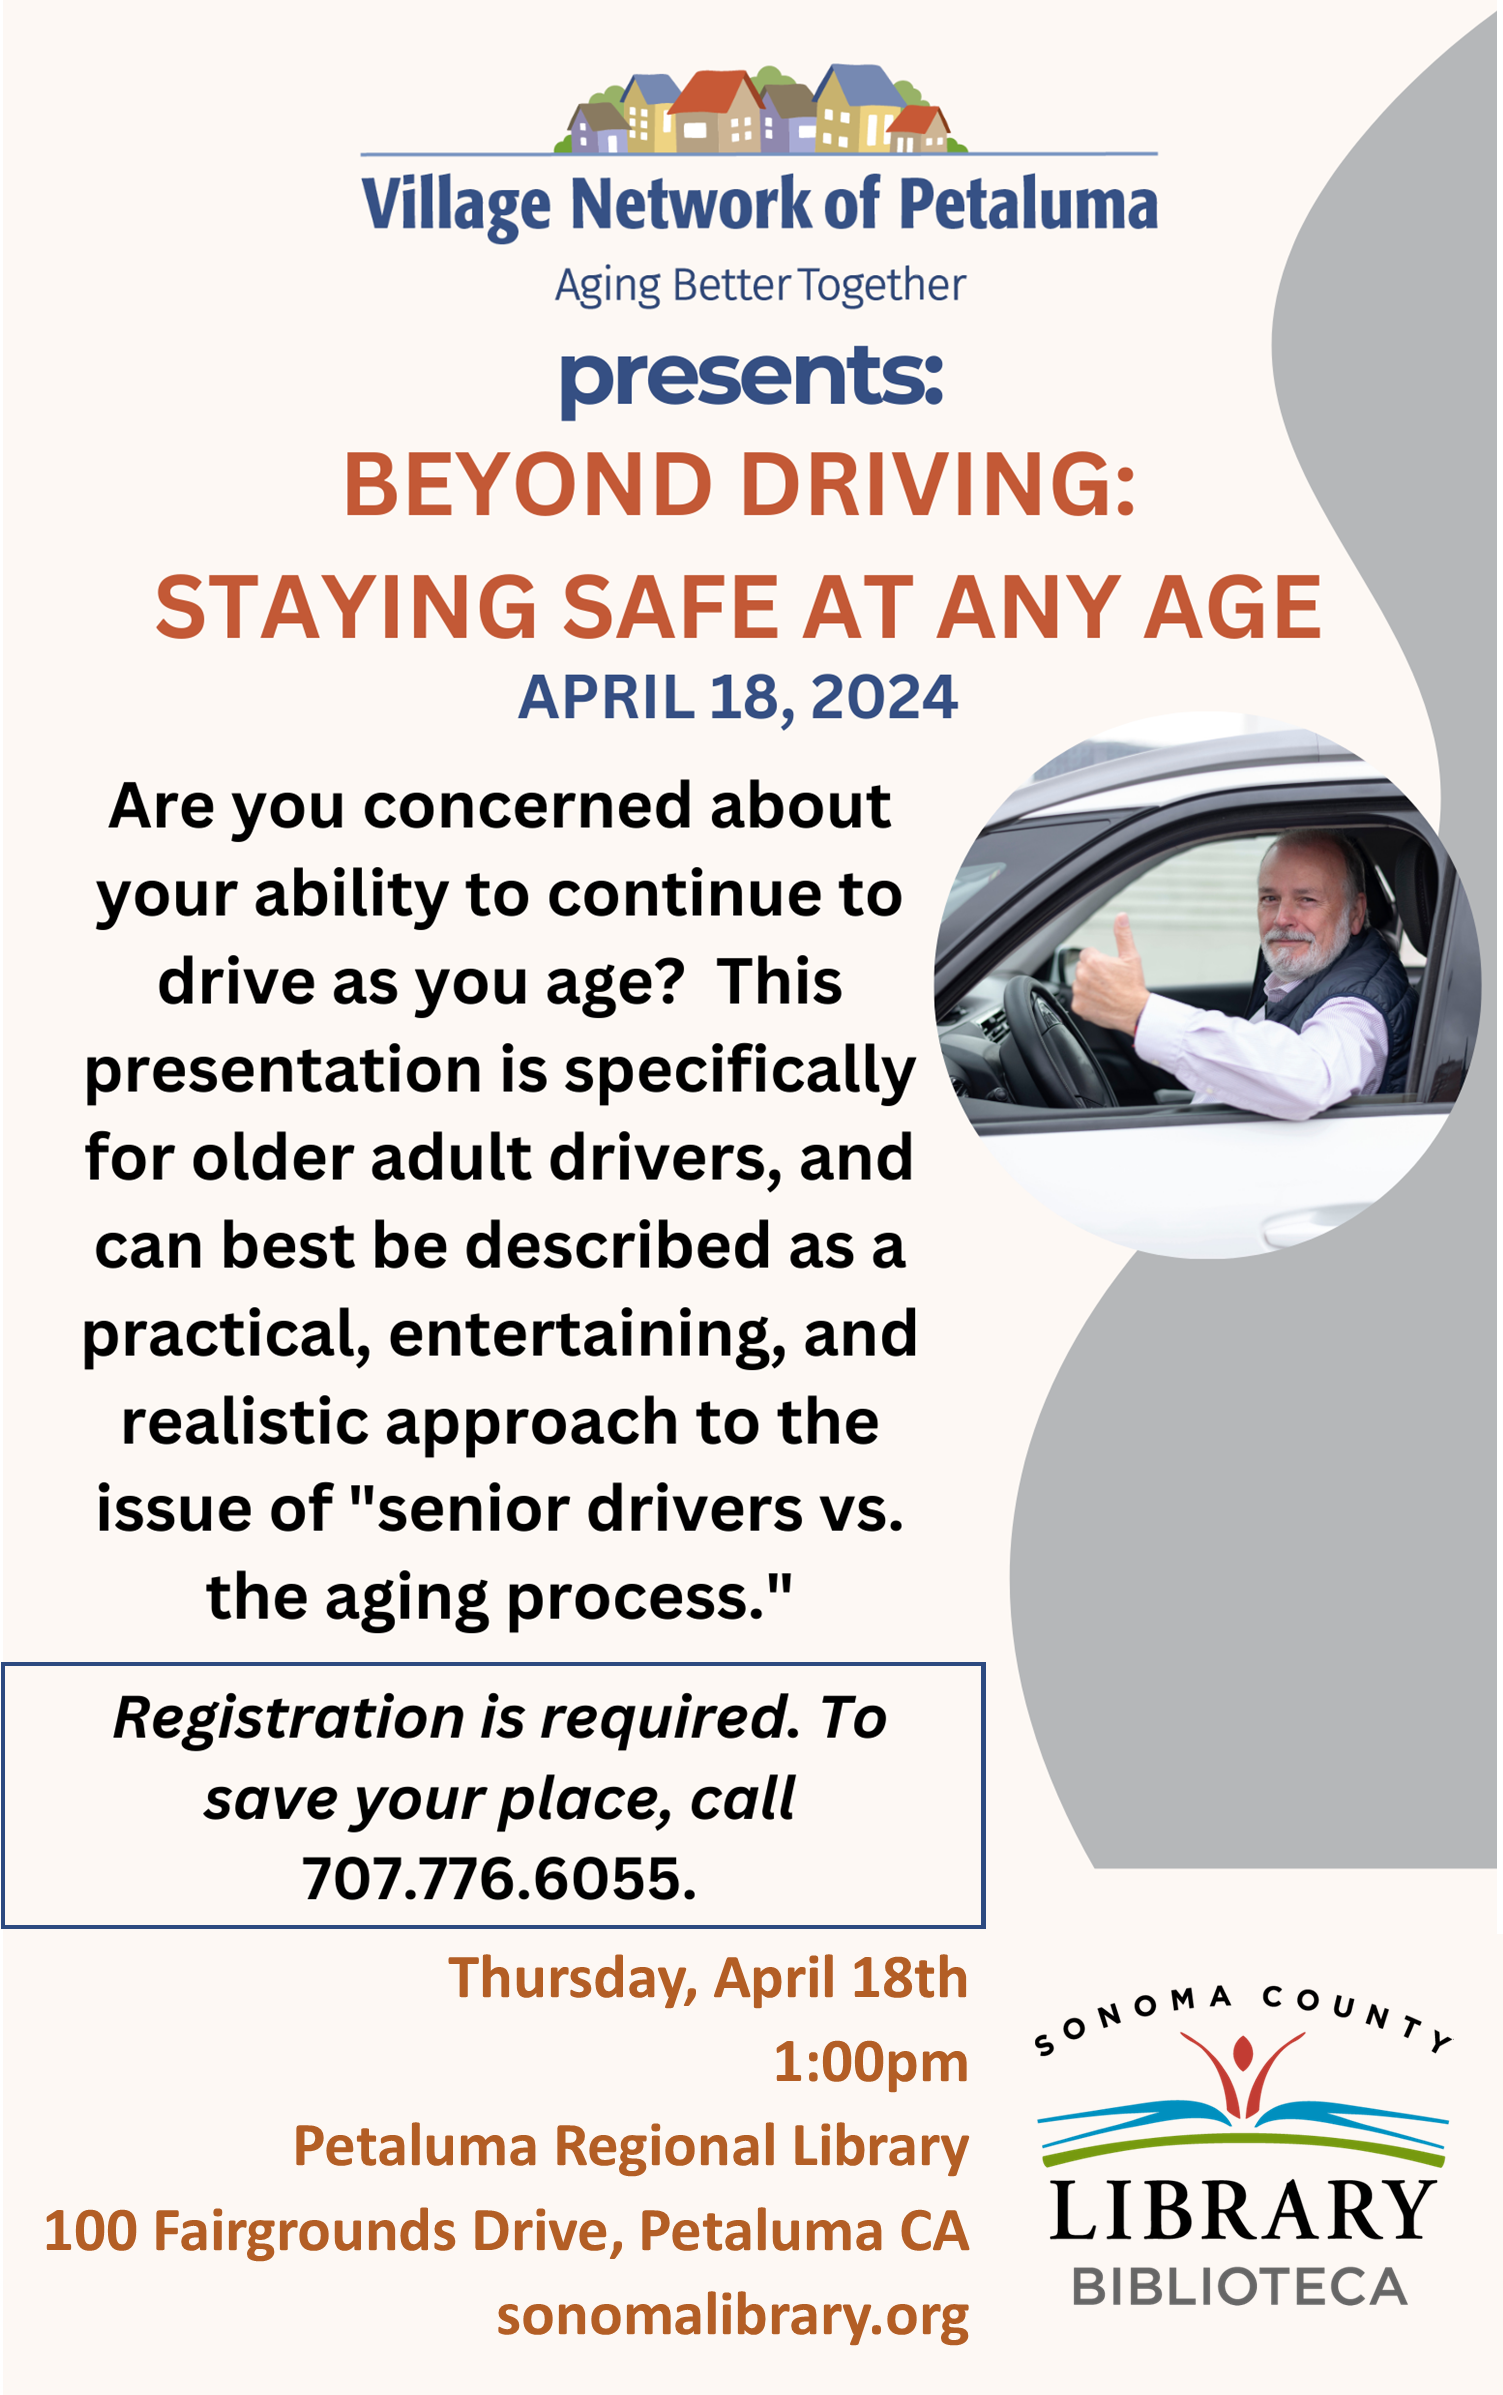 Poster announcing event on April 18, Village Network of Petaluma presents Beyond Driving: Staying Safe at Any Age